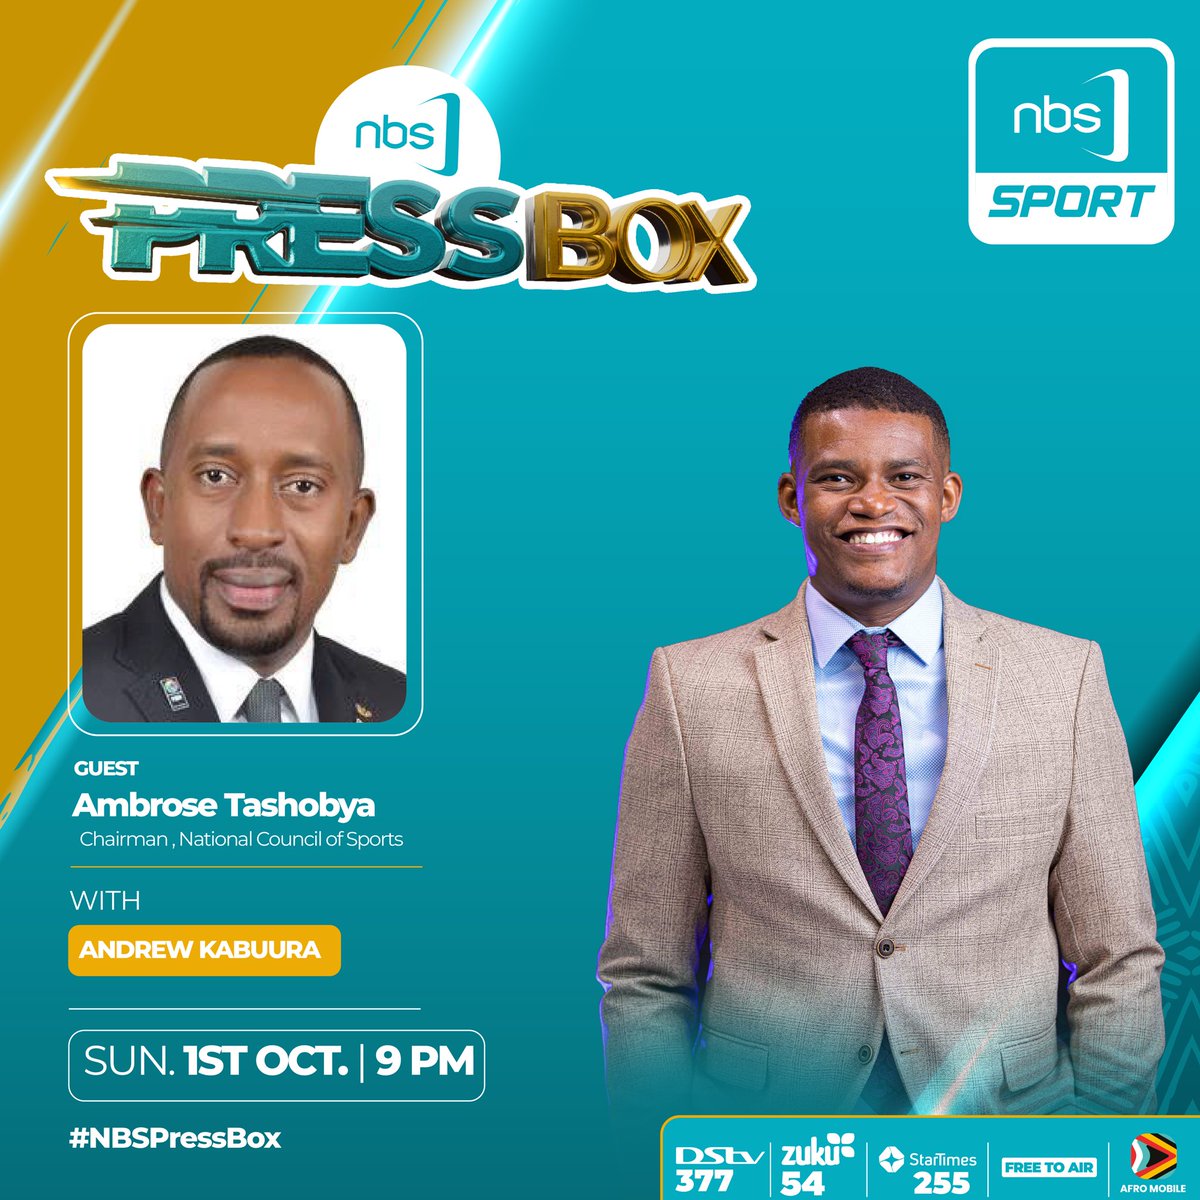 As @NCSUganda1 chairman, Ambrose Tashobya joins #NBSPressBox tonight, what questions about the #AFCON2027 preparations do you want him to answer? #NBSportUpdates